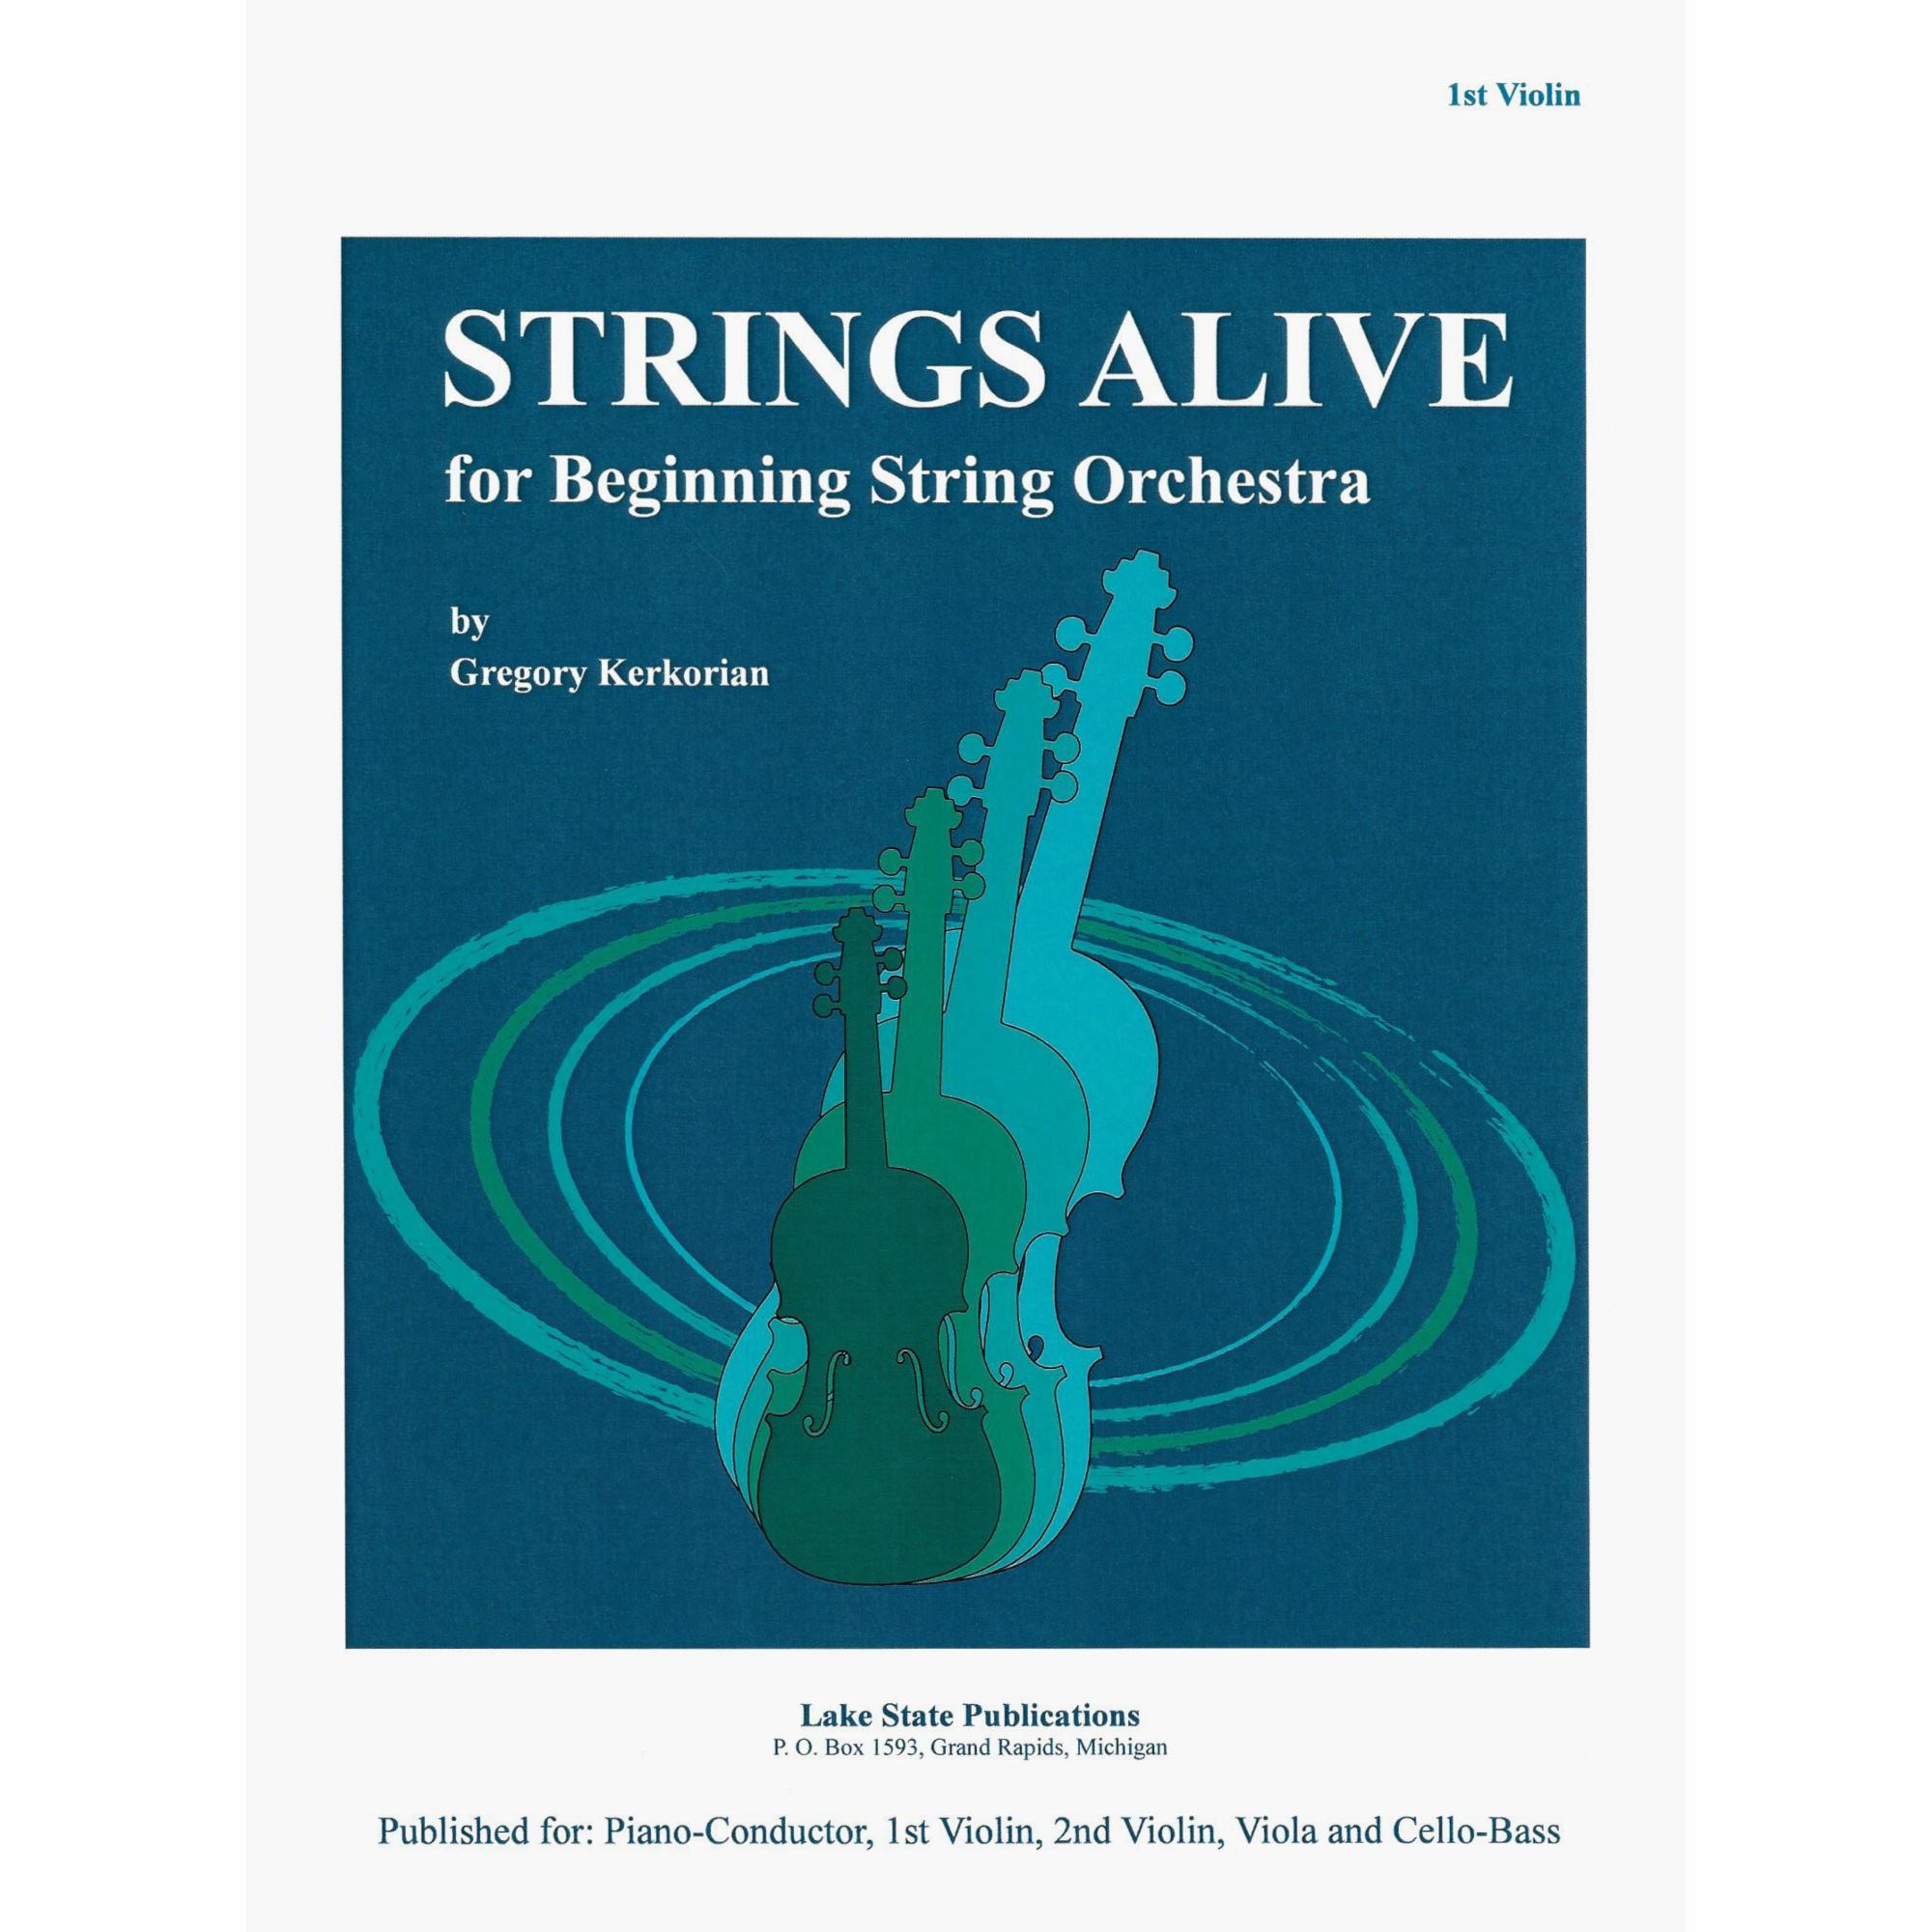 Strings Alive for Beginning String Orchestra